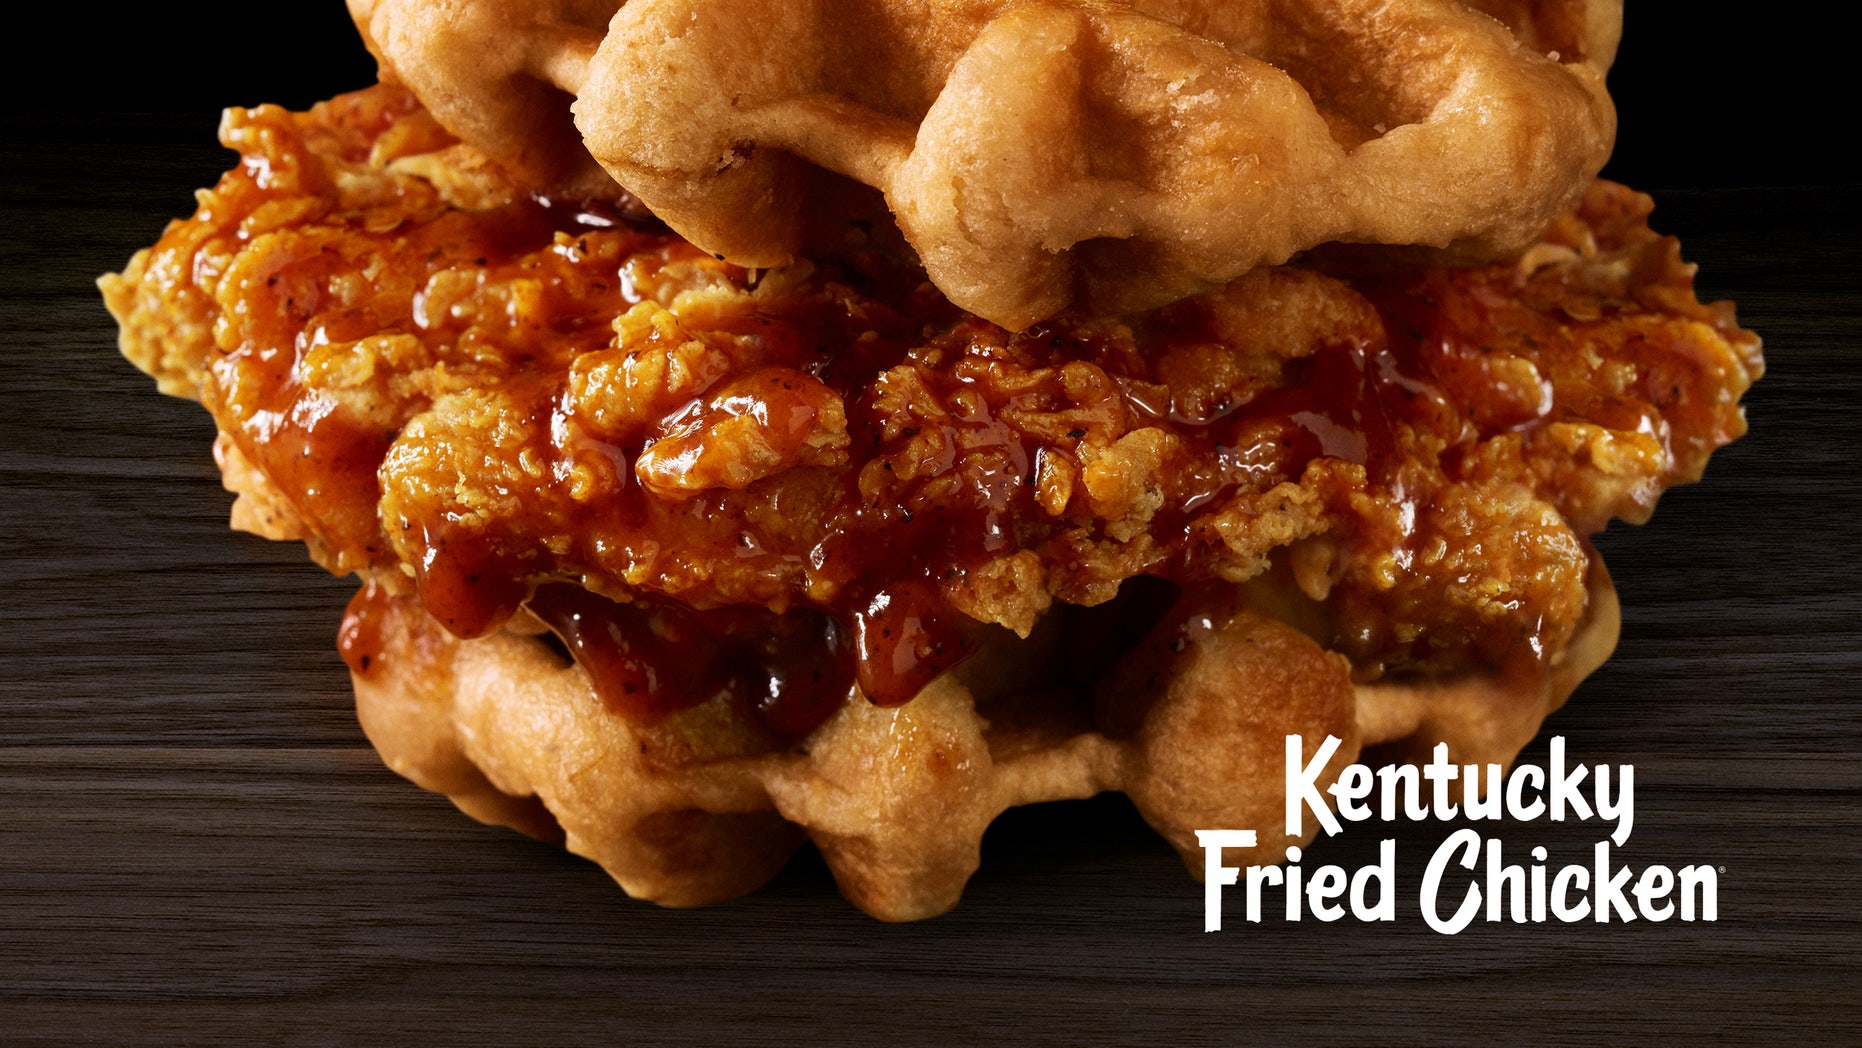 The new limited edition offer begins with a crispy fried chicken topped with Mrs. Butterworth's maple syrup between two Belgian waffles in a Liege style.